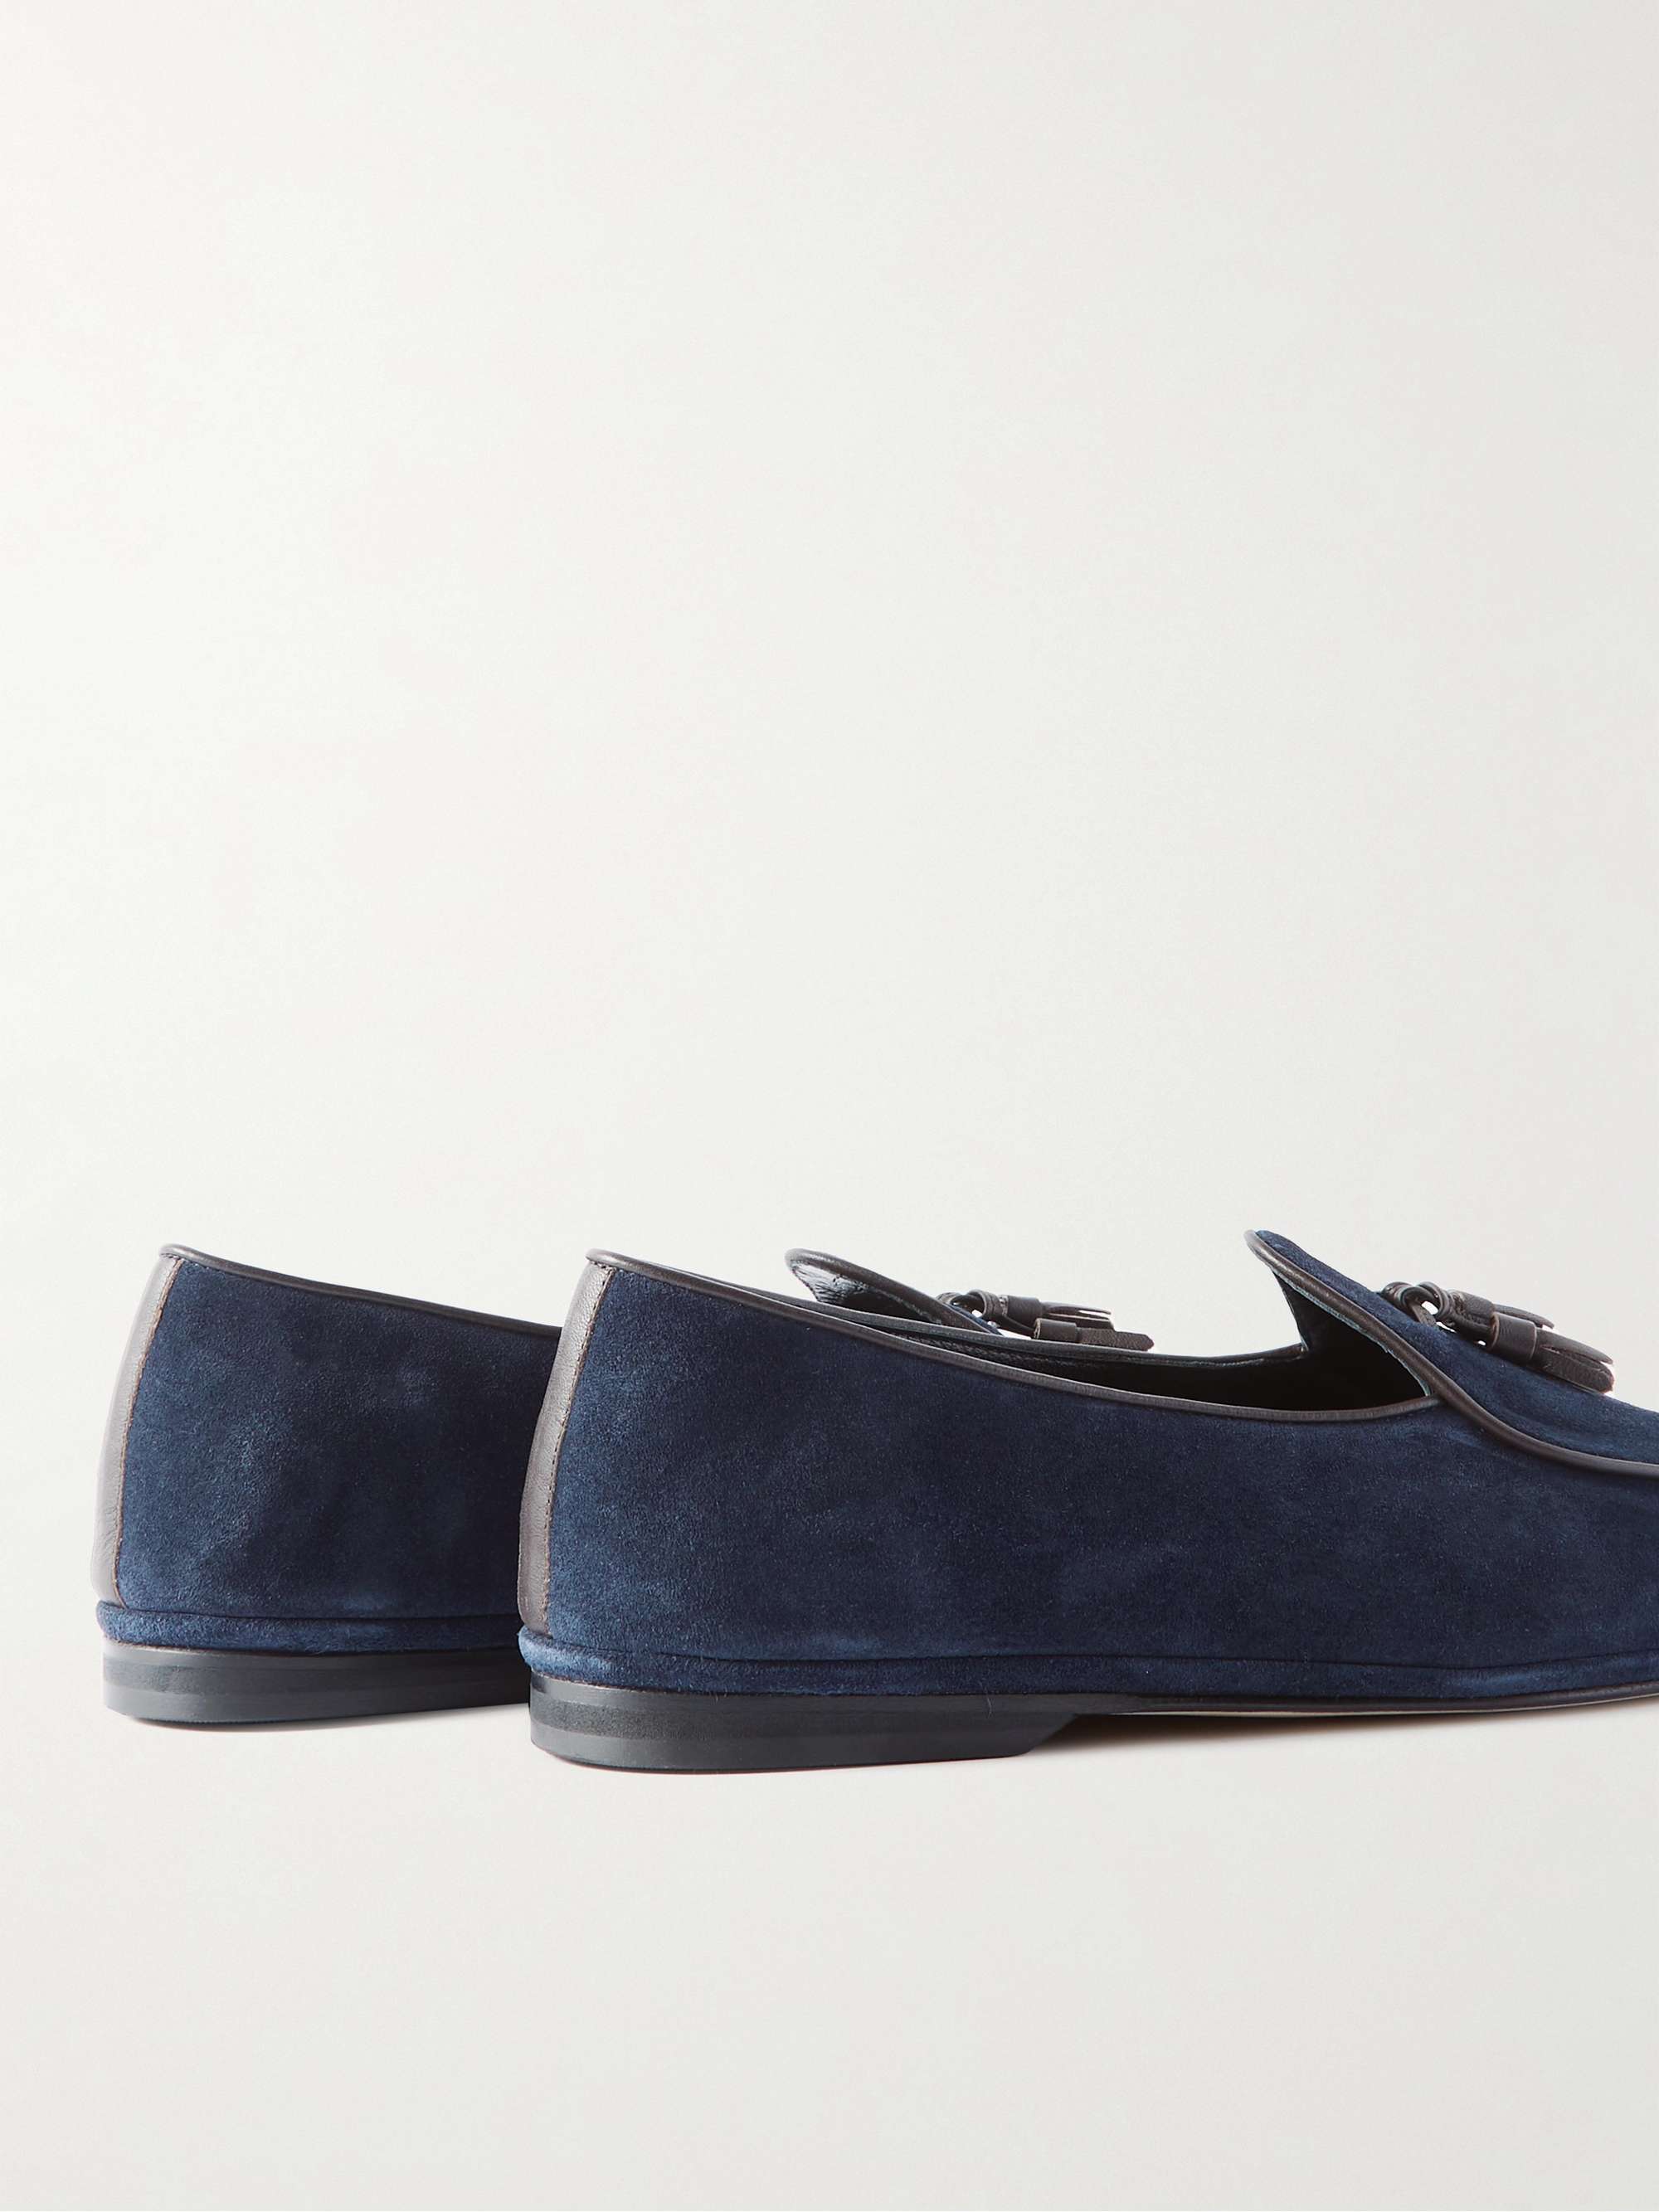 RUBINACCI Marphy Leather-Trimmed Suede Tasselled Loafers